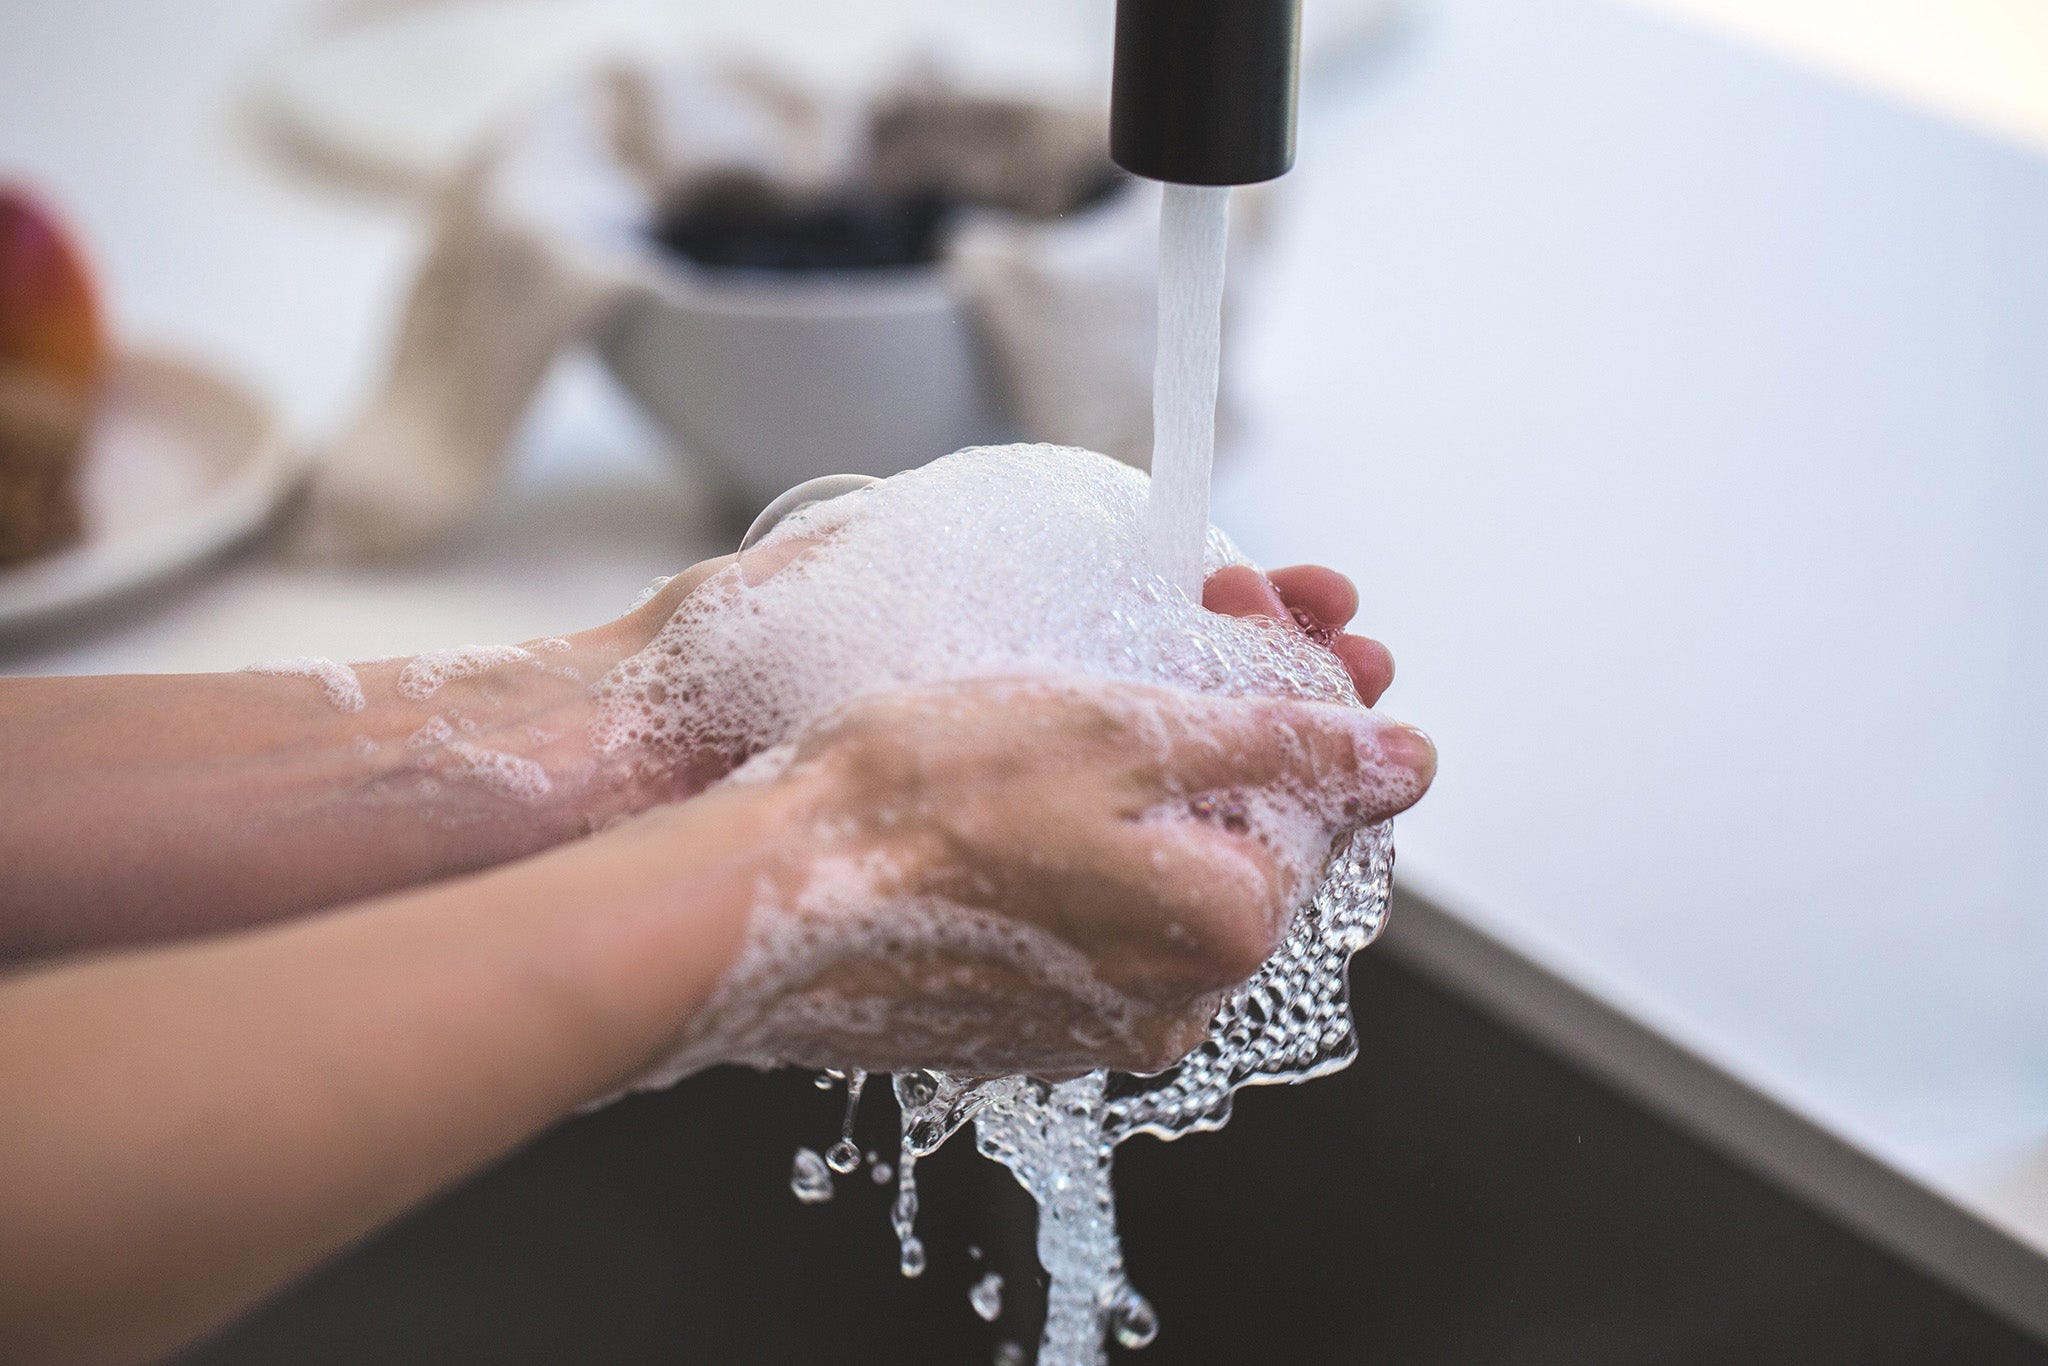 rinsing soapy hands